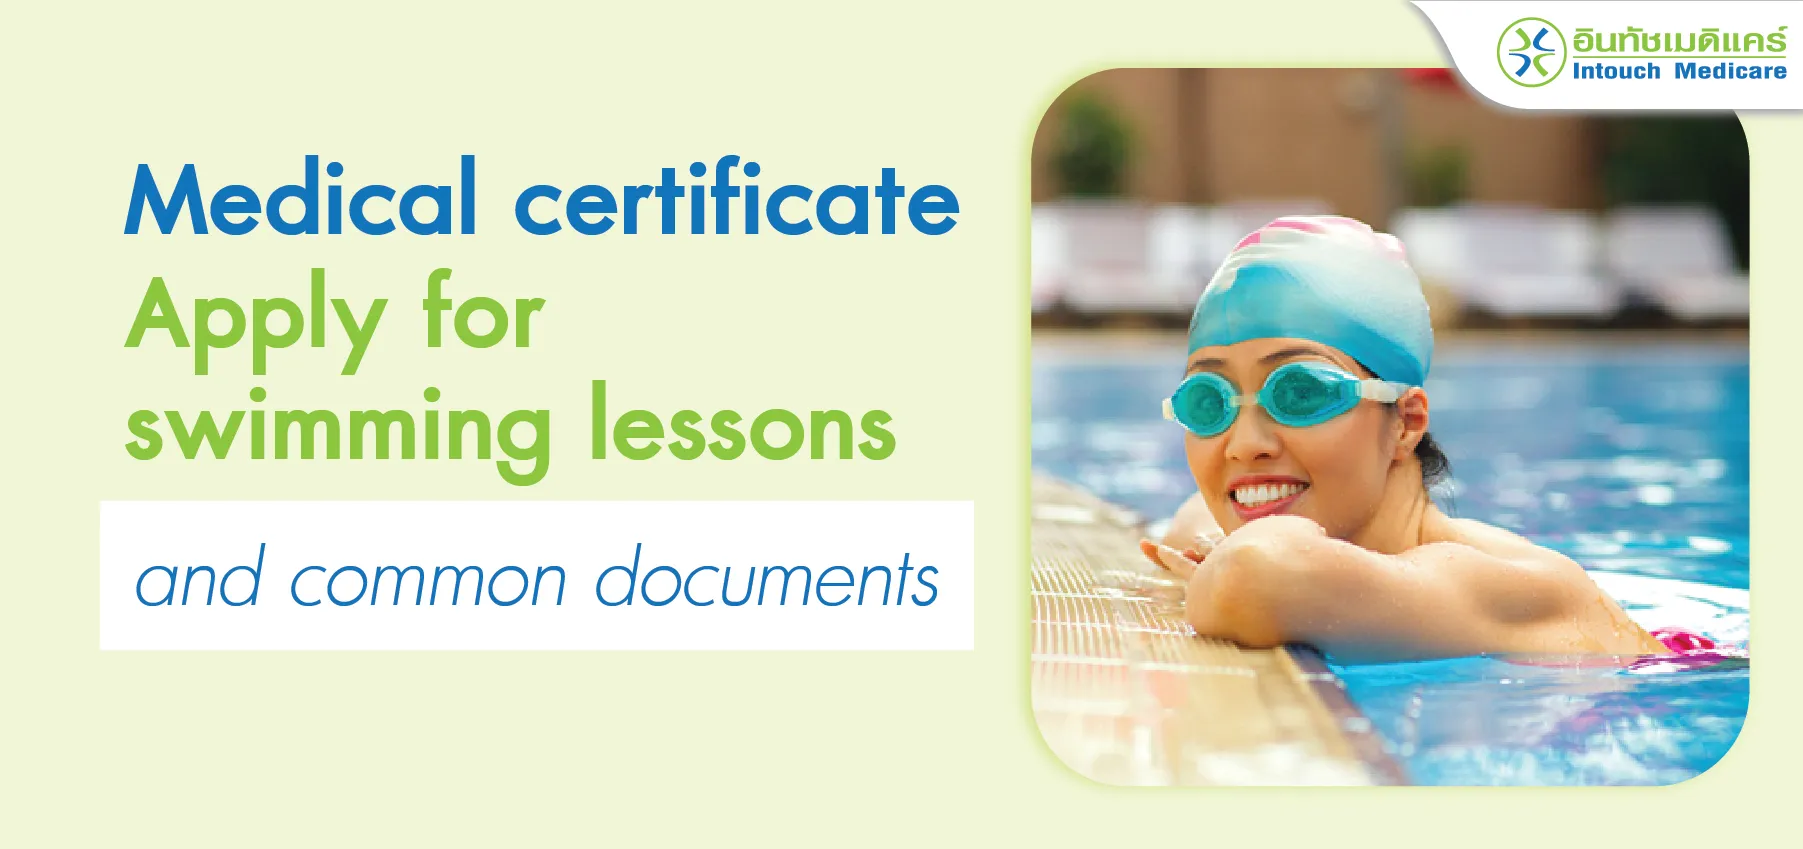 Medical certificate Apply for swimming lessons and common documents